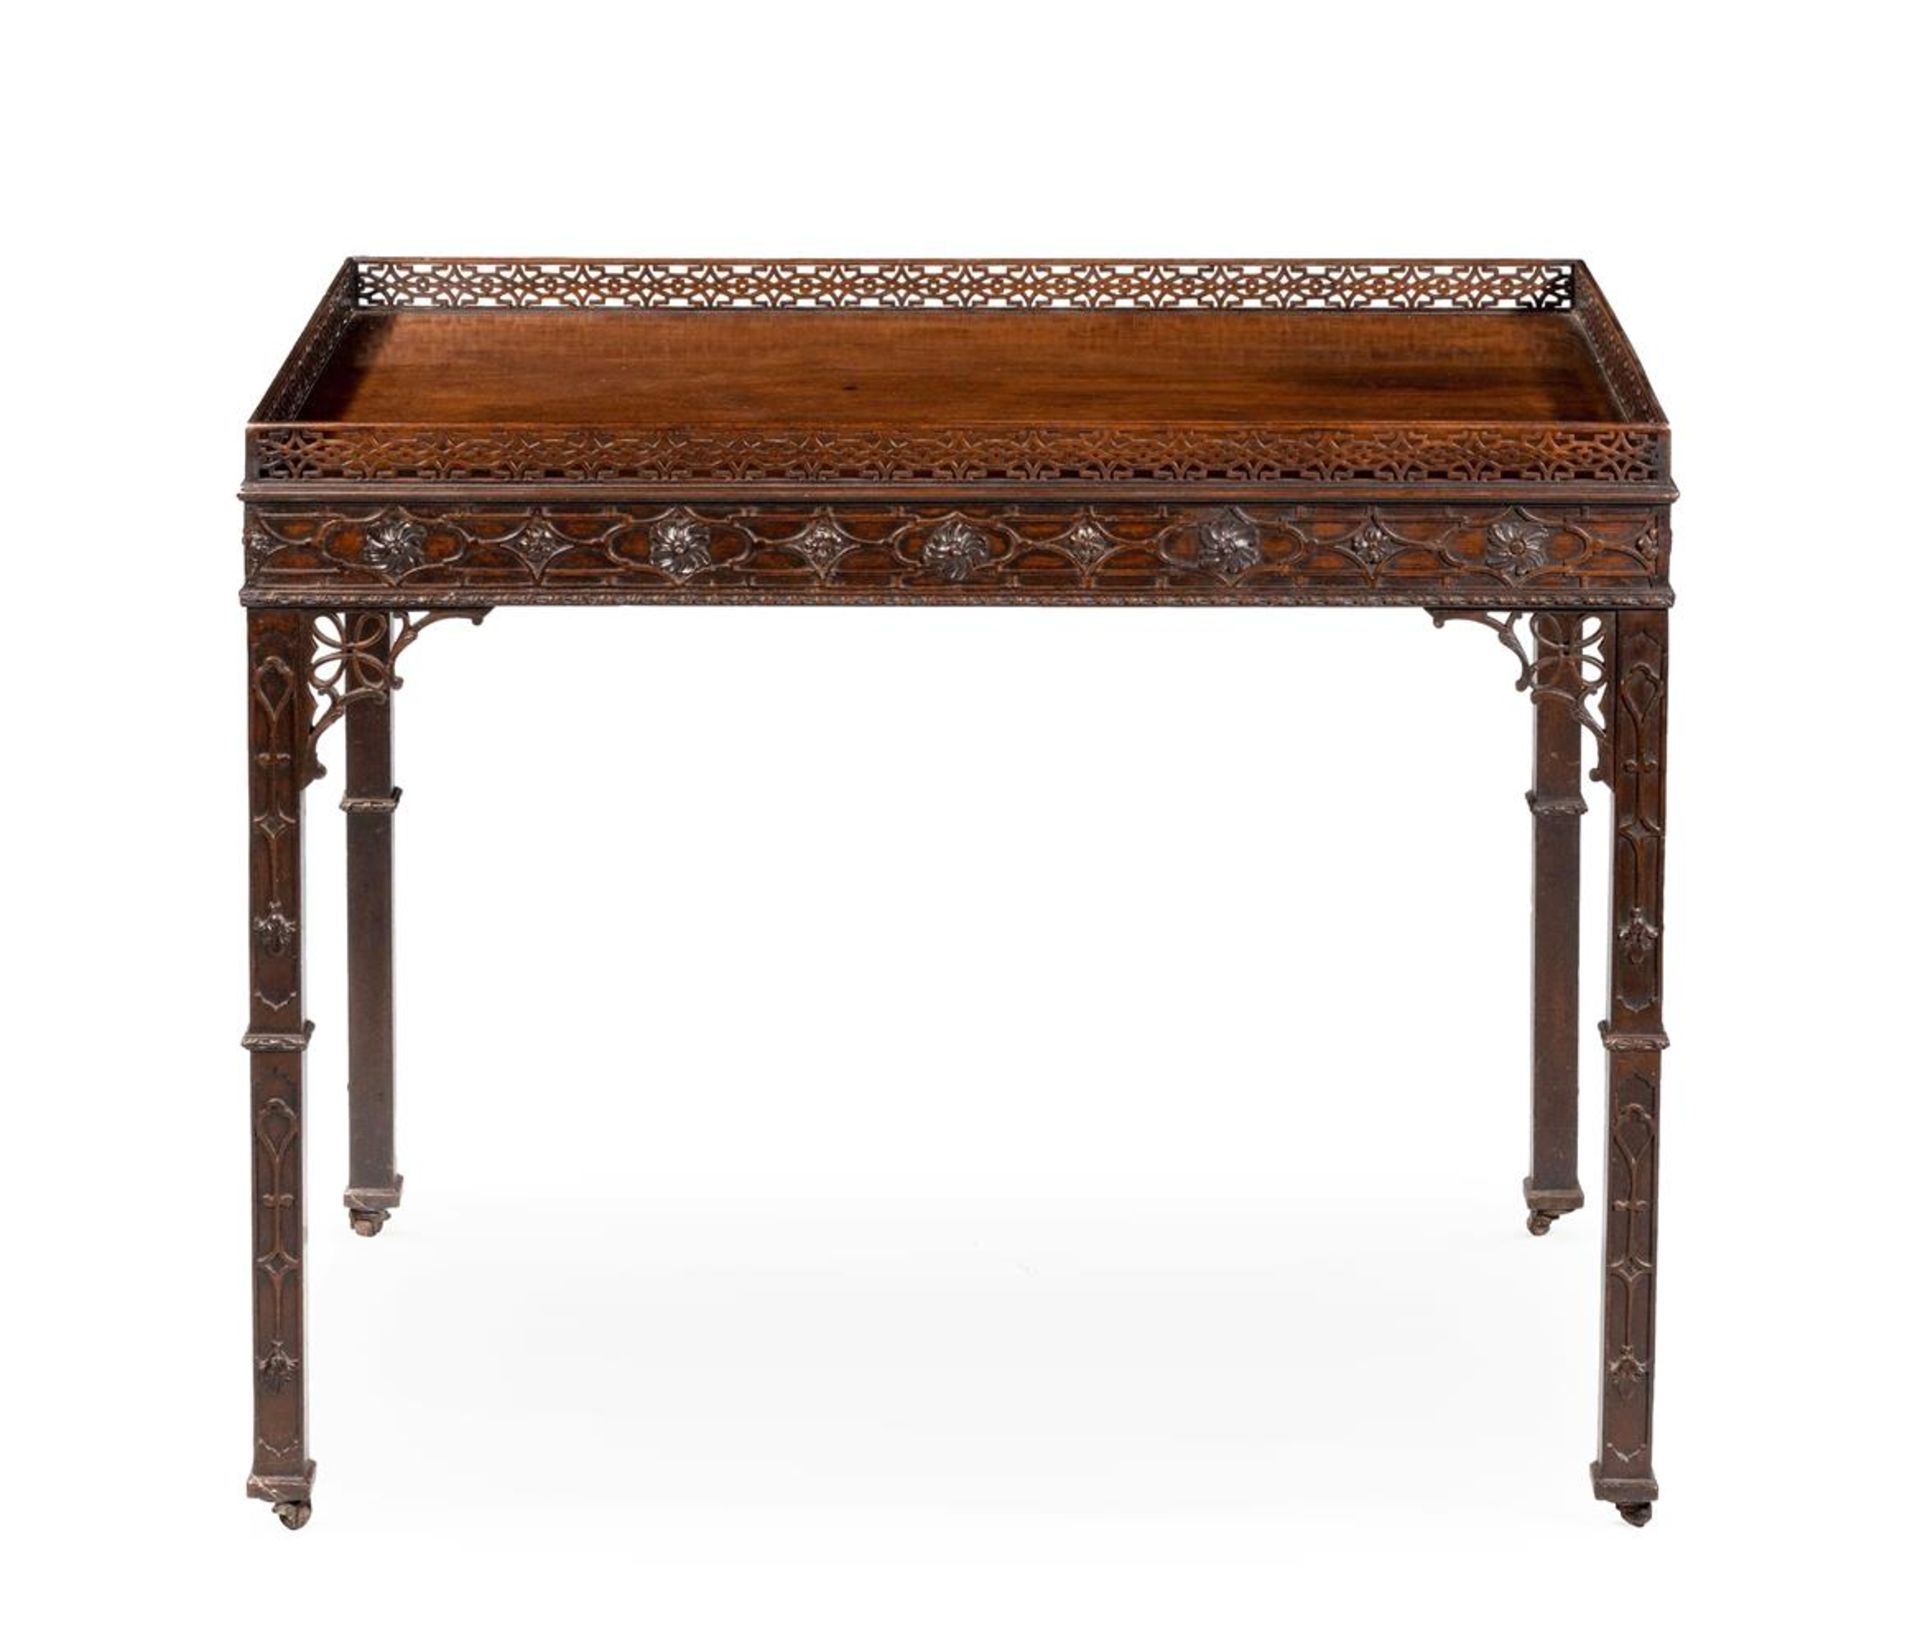 A GEORGE III MAHOGANY SILVER TABLE IN THE MANNER OF THOMAS CHIPPENDALE - Image 2 of 4